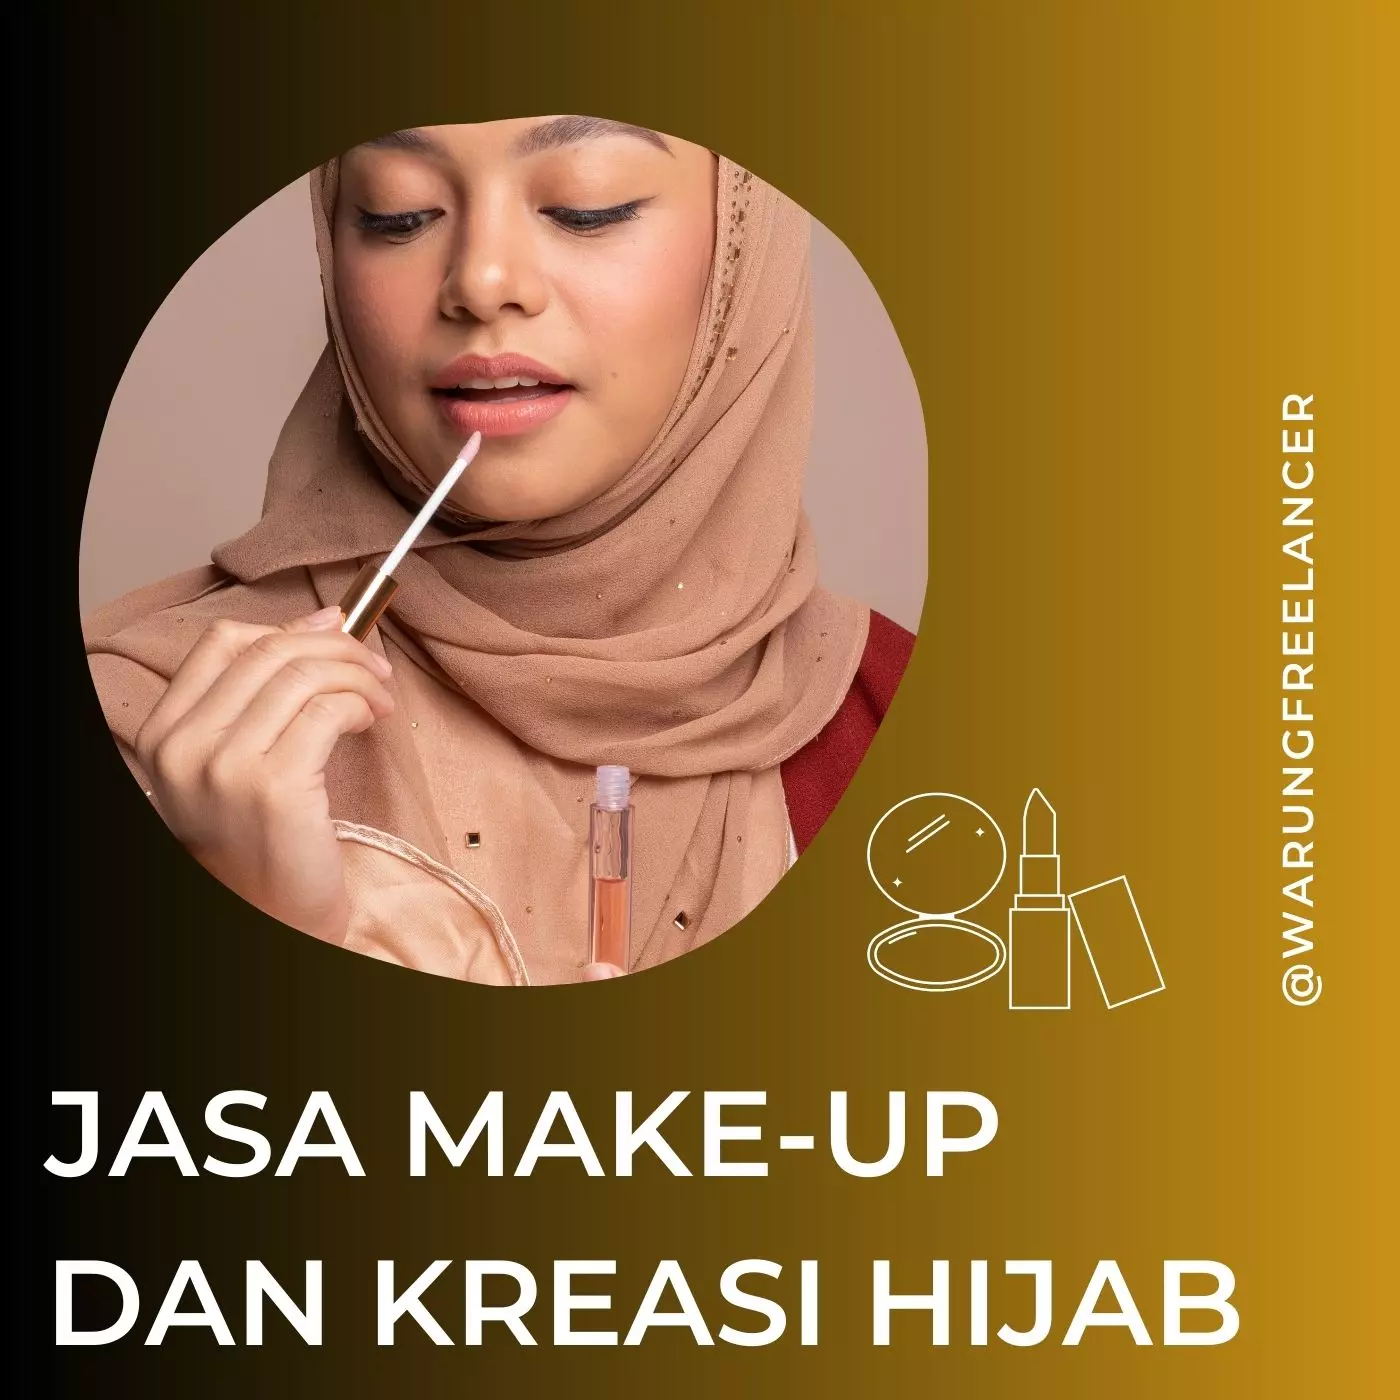 Hijab Make Up and Creation Services